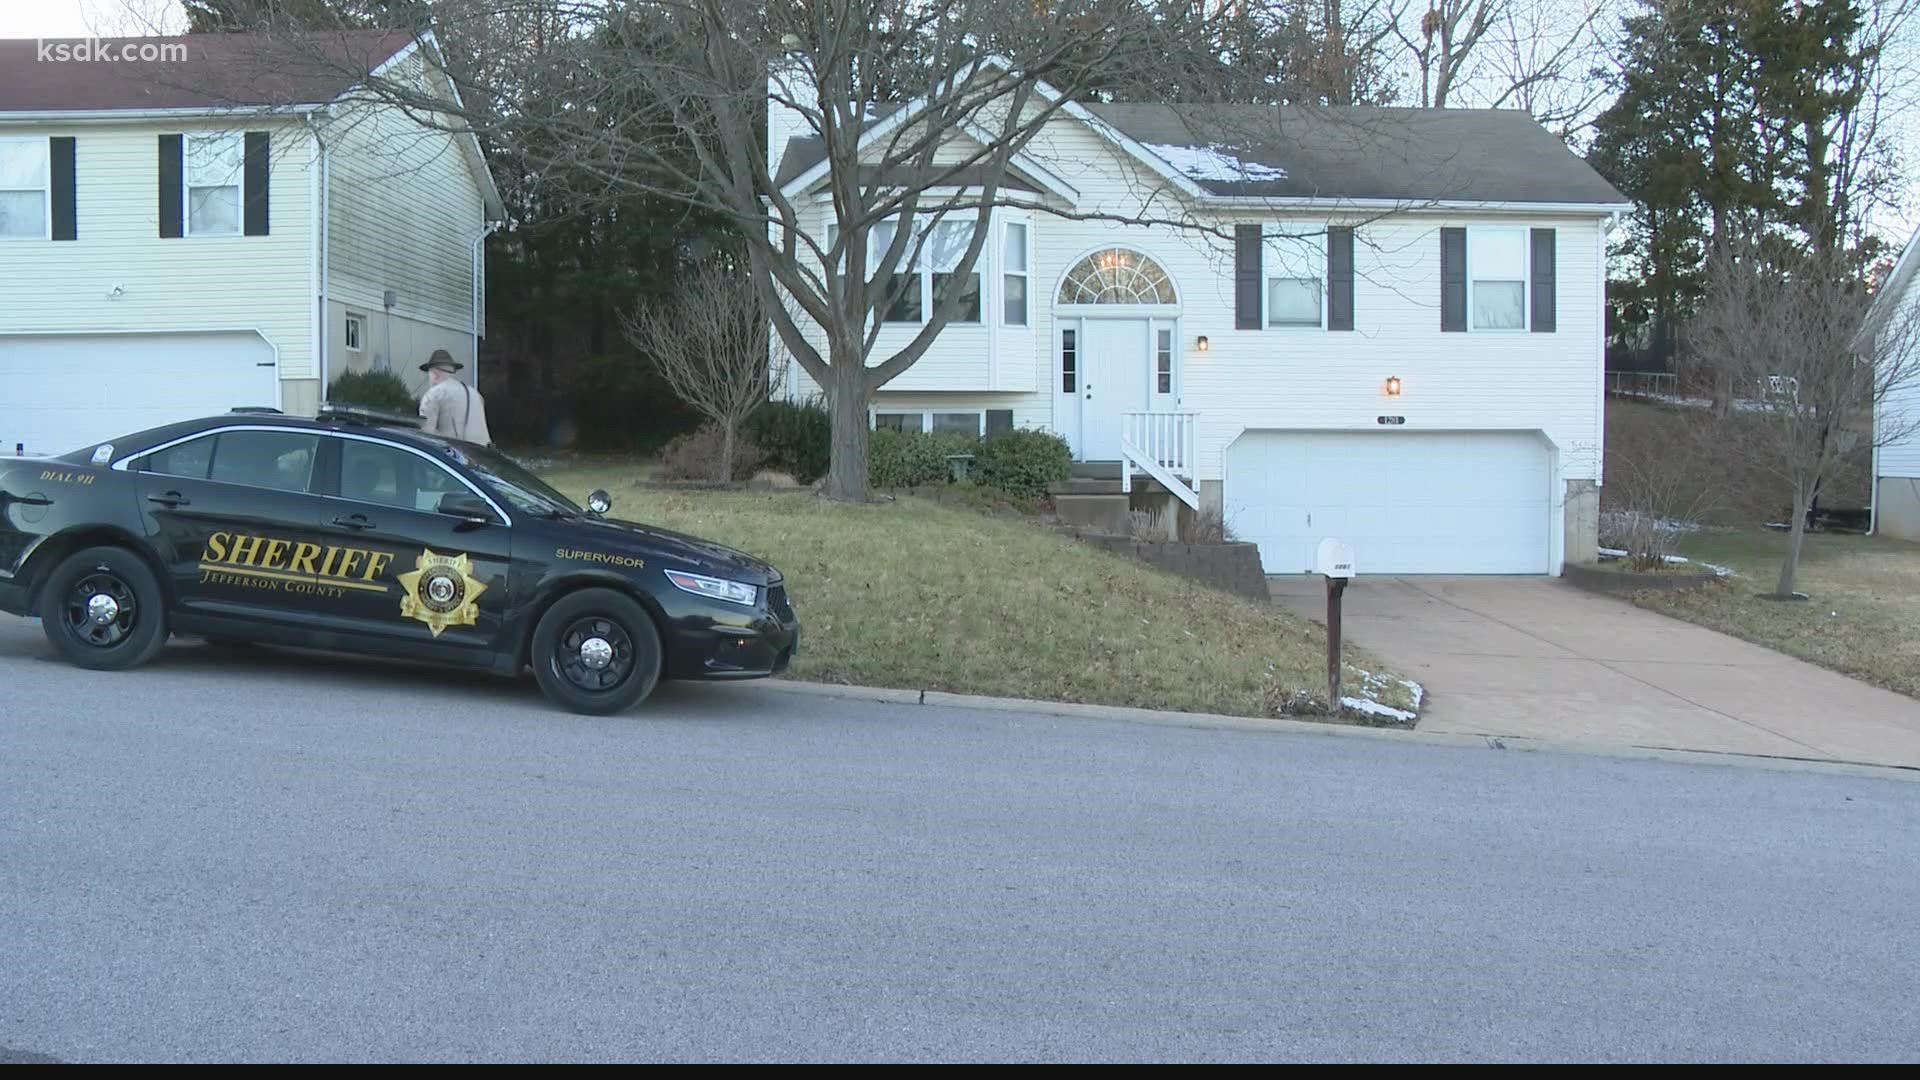 Deputies found a man with a gun in his hand and a woman both shot dead inside a home in Jefferson County.